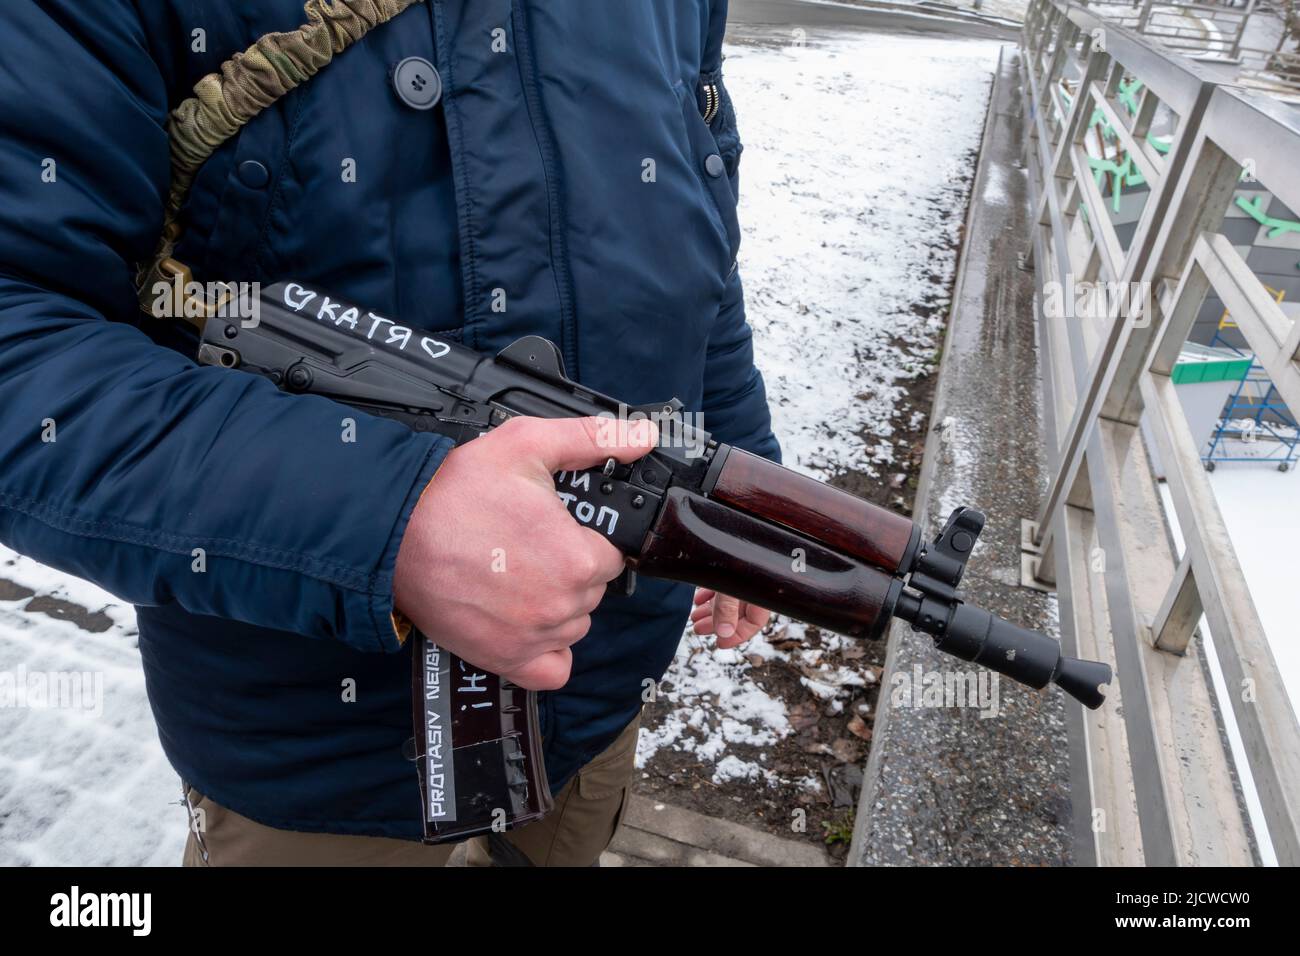 KYIV, UKRAINE 01 March. A member of the Territorial defense forces stands guard with a Kalashnikov rifle bearing writing with the name of his girlfriend 'Katia' in Protasiv neighbourhood as Russia's invasion of Ukraine continues on 01 March 2022 in Kiev, Ukraine. World War II. Stock Photo